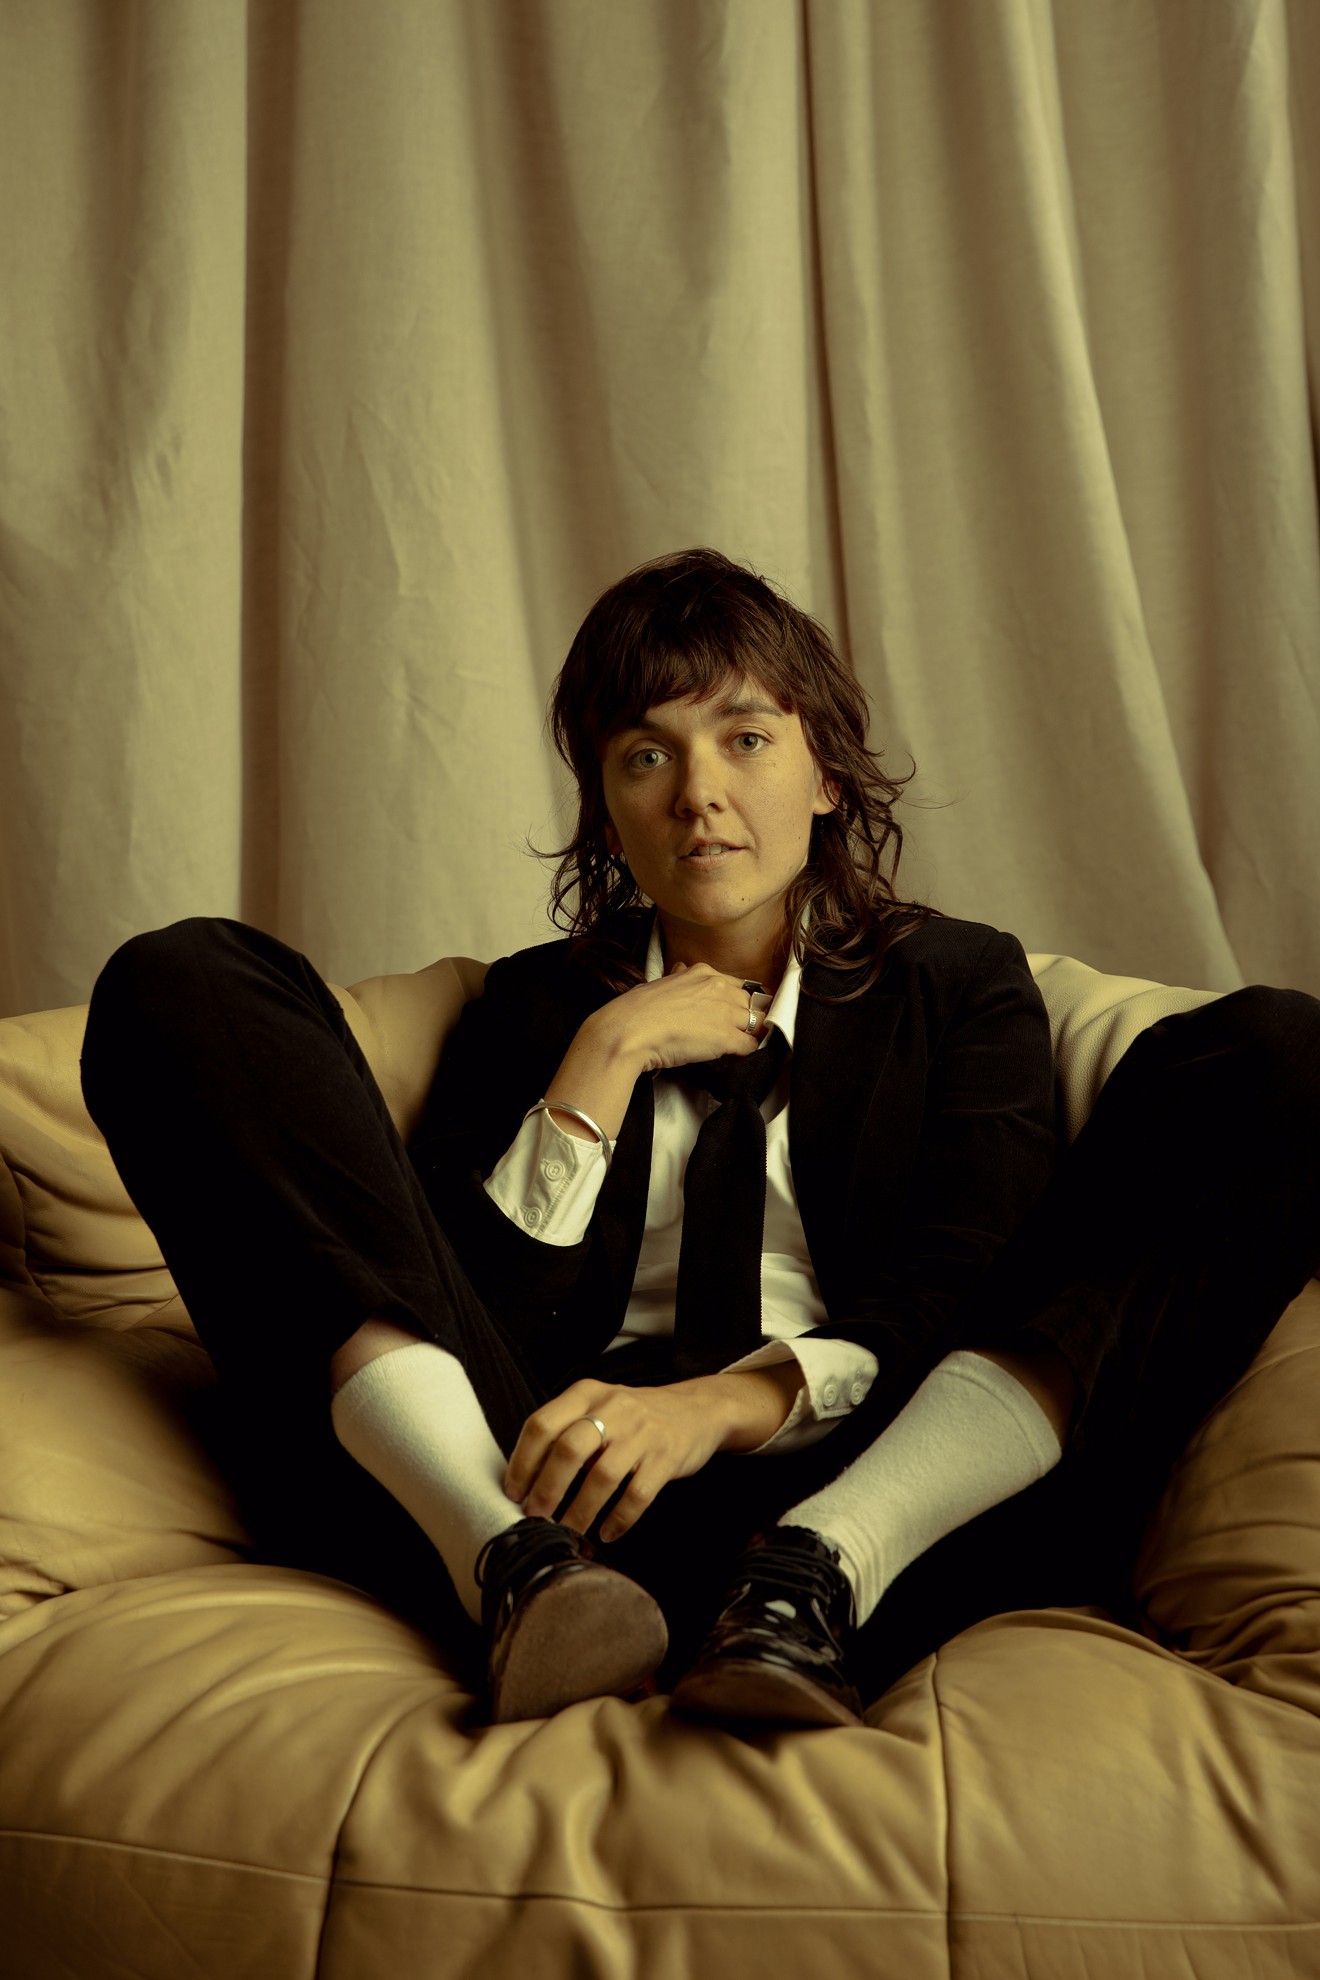 Courtney Barnett has a lot to say about the Australian bush fires.